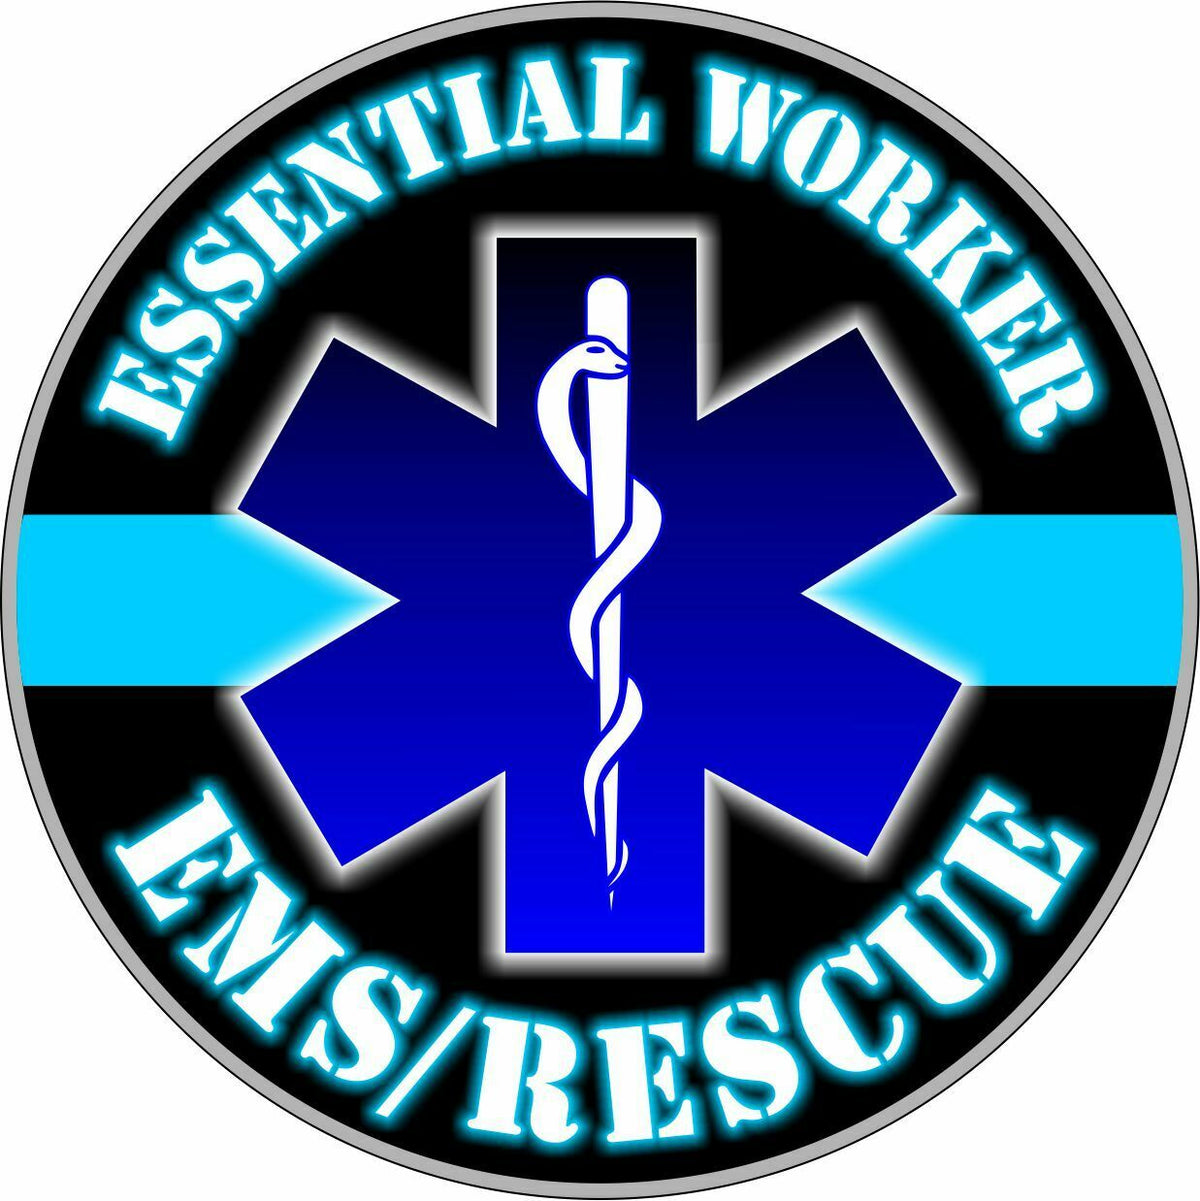 Essential Worker Decal - Police Officer Hardhat/Window Sticker - Various sizes - Powercall Sirens LLC